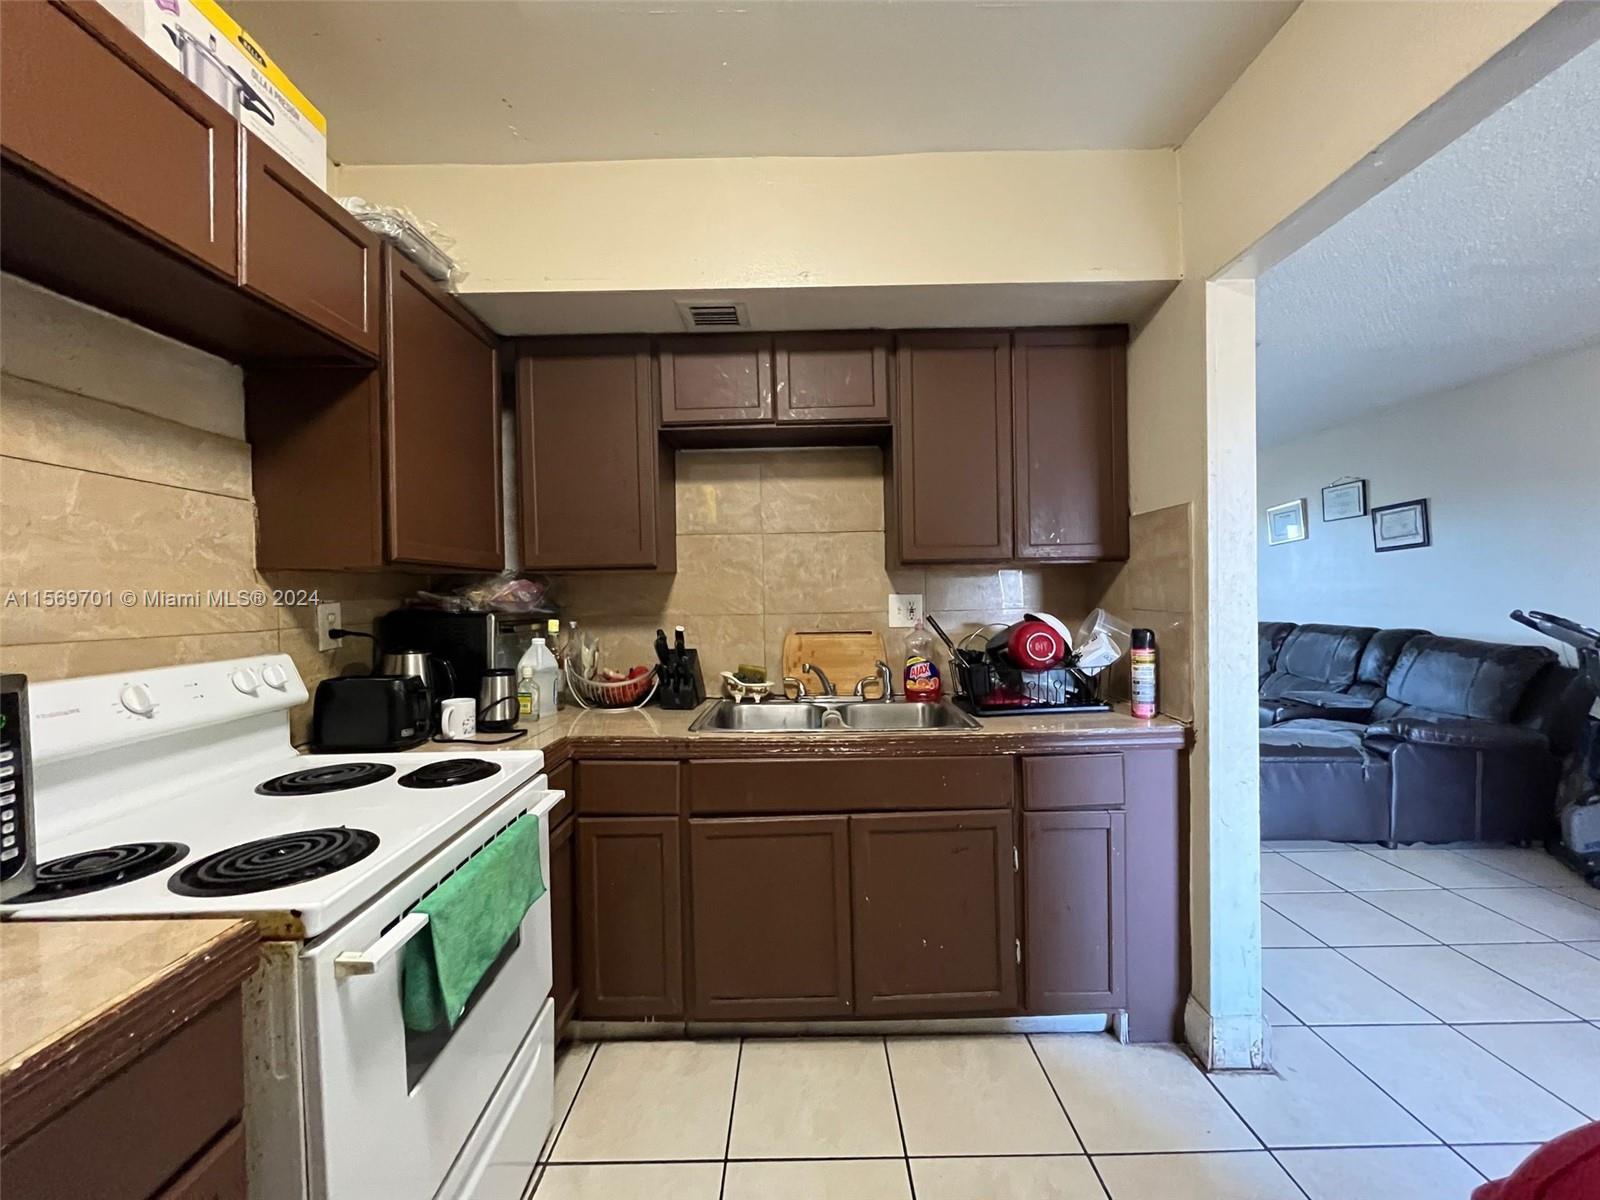 Photo of 3600 NW 21st St #408 in Lauderdale Lakes, FL